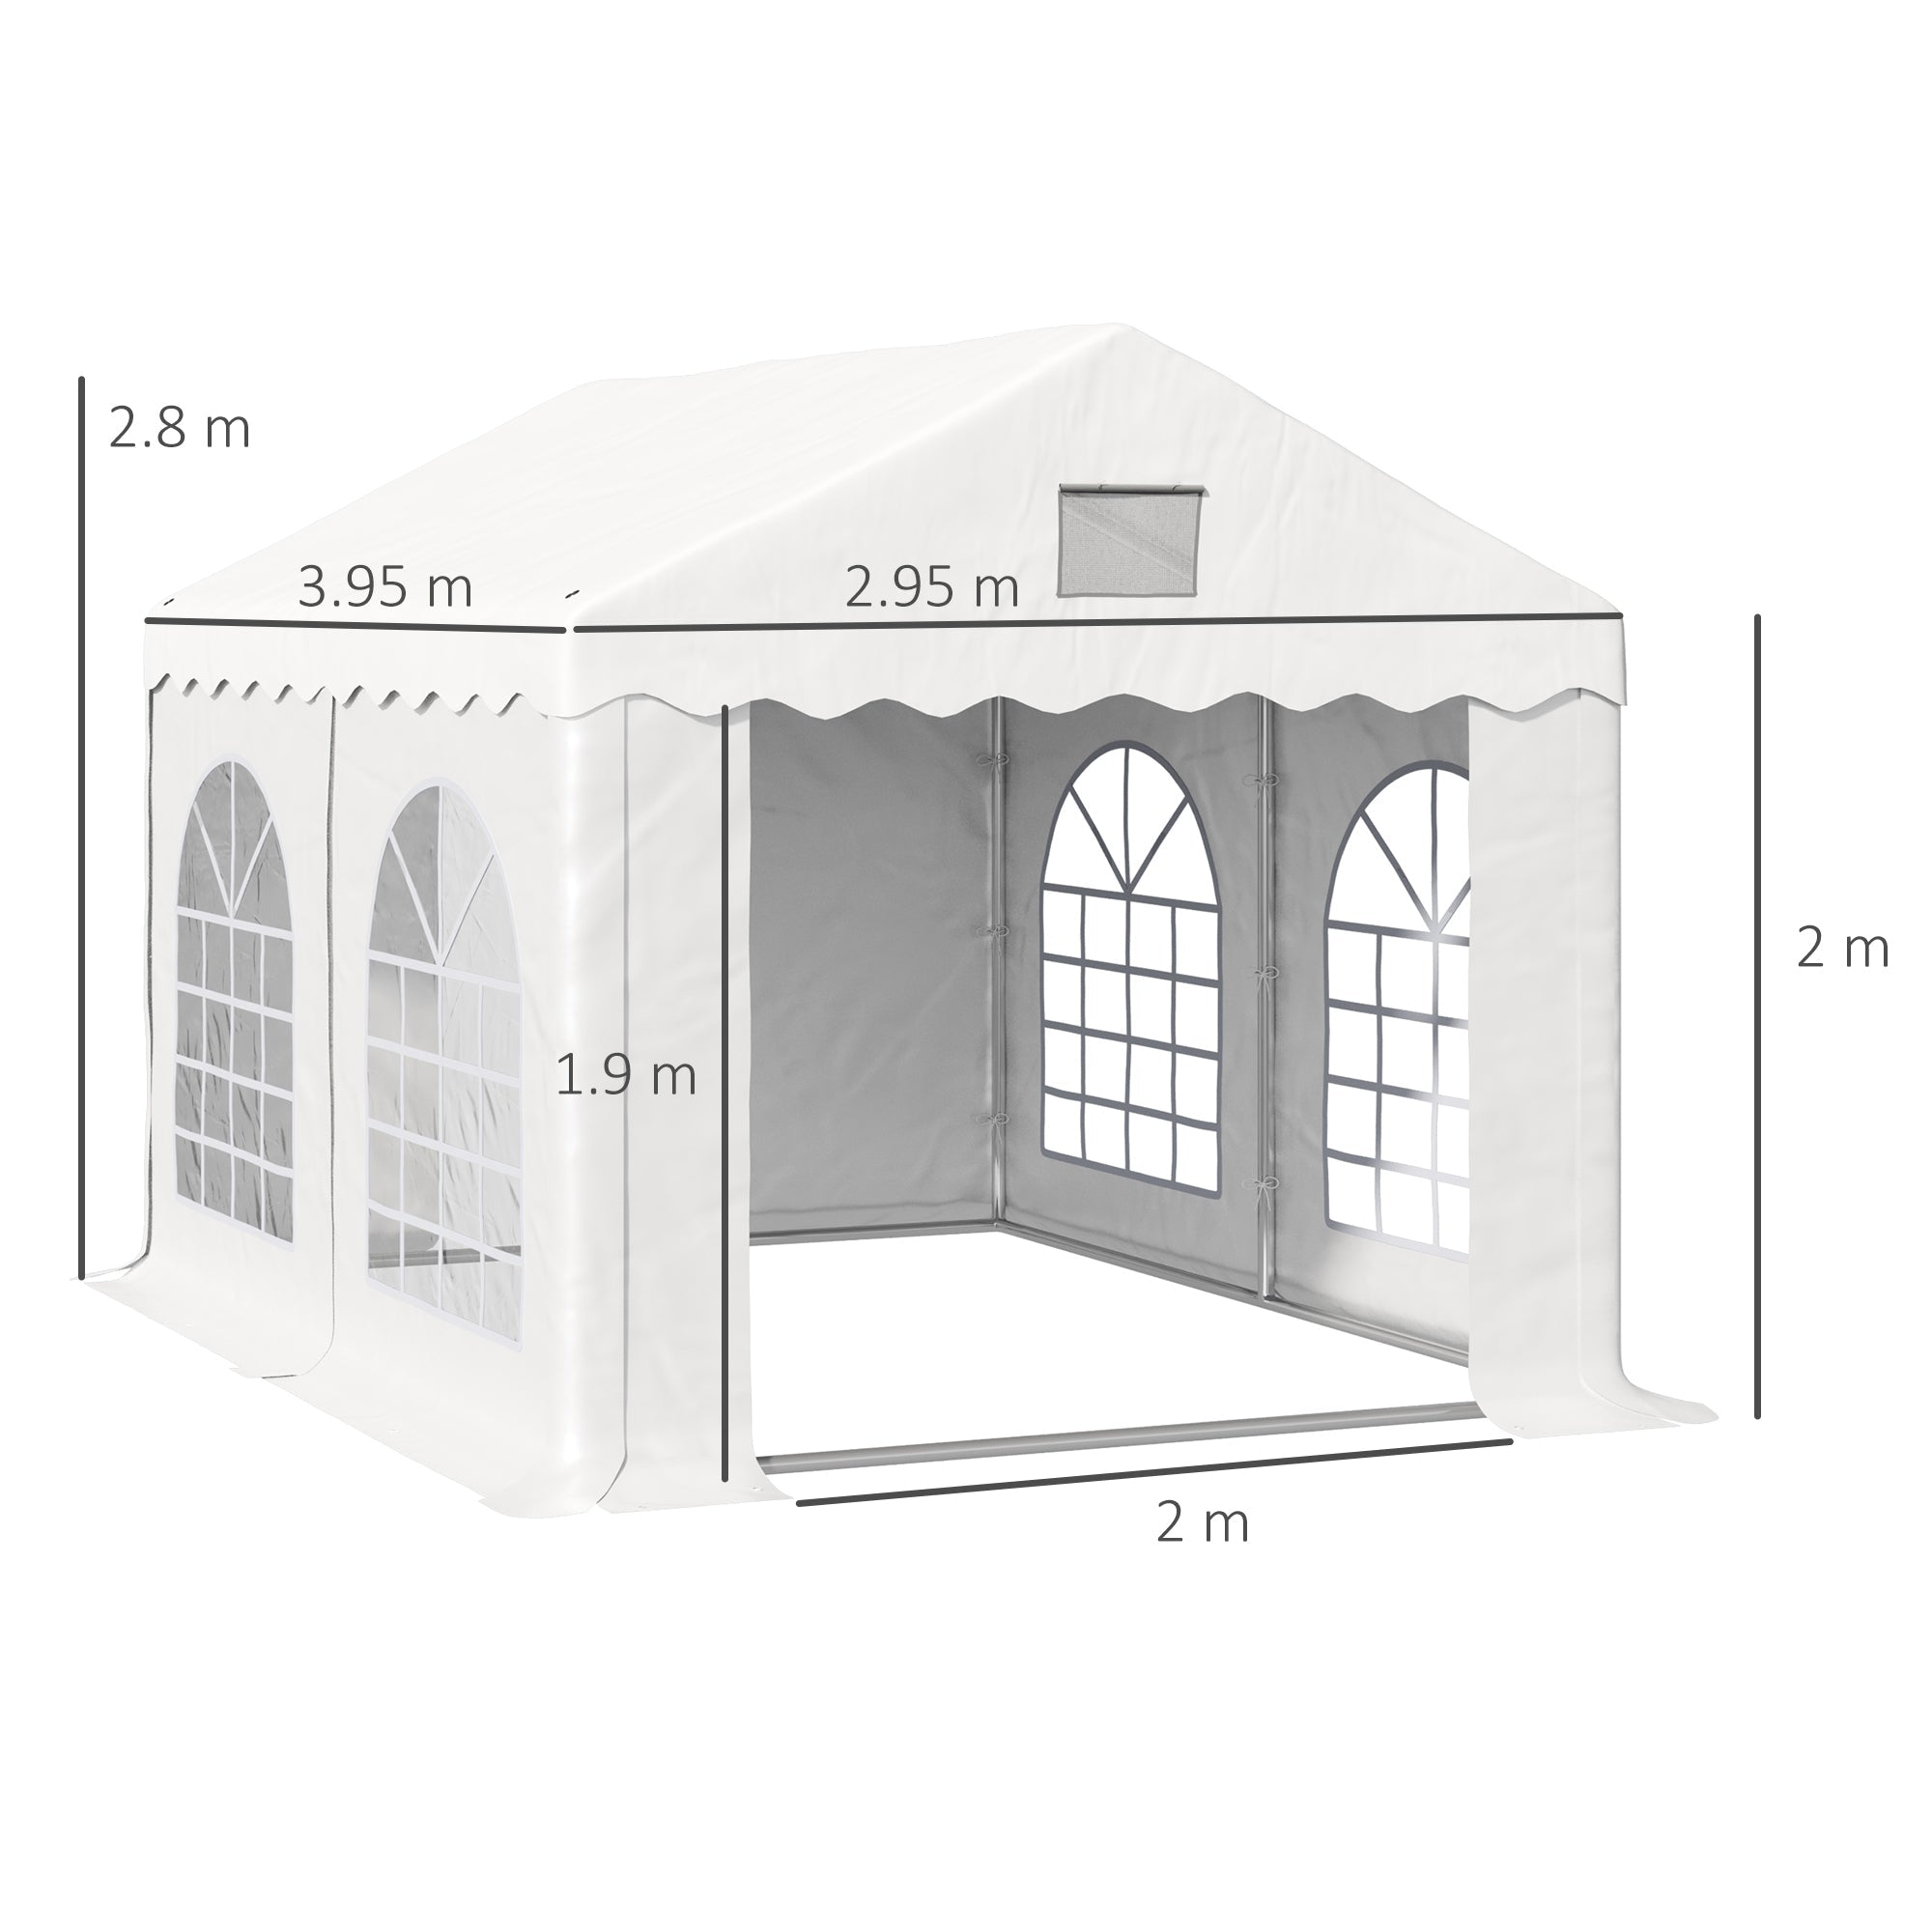 4 x 3 m Gazebo Canopy Party Tent with 4 Removable Side Walls and Windows for Outdoor Event, White-2